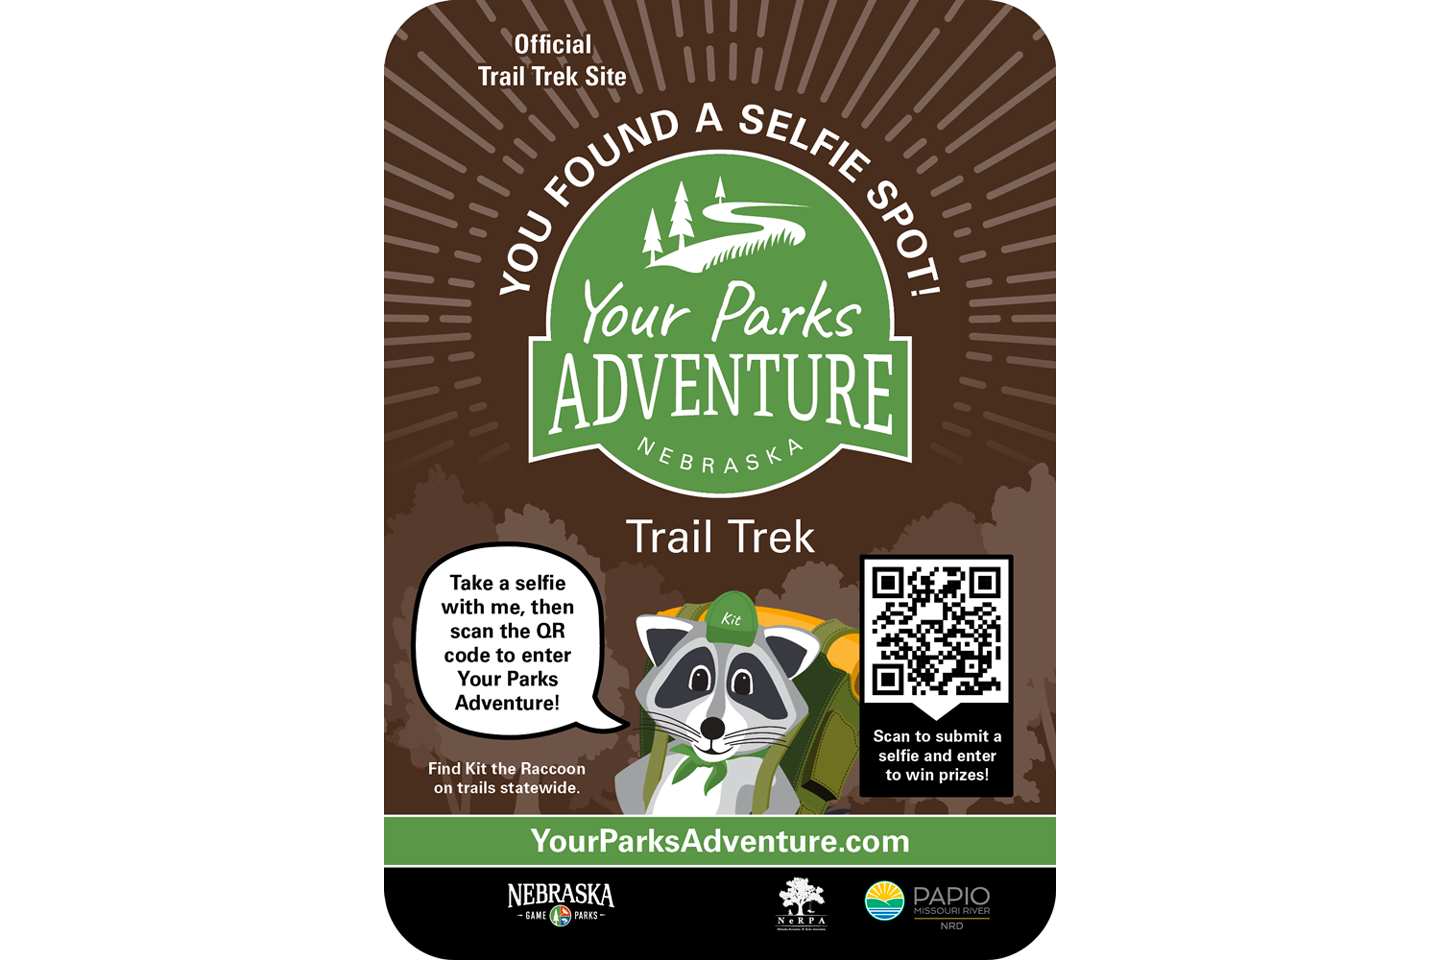 Read More: Your Parks Adventure